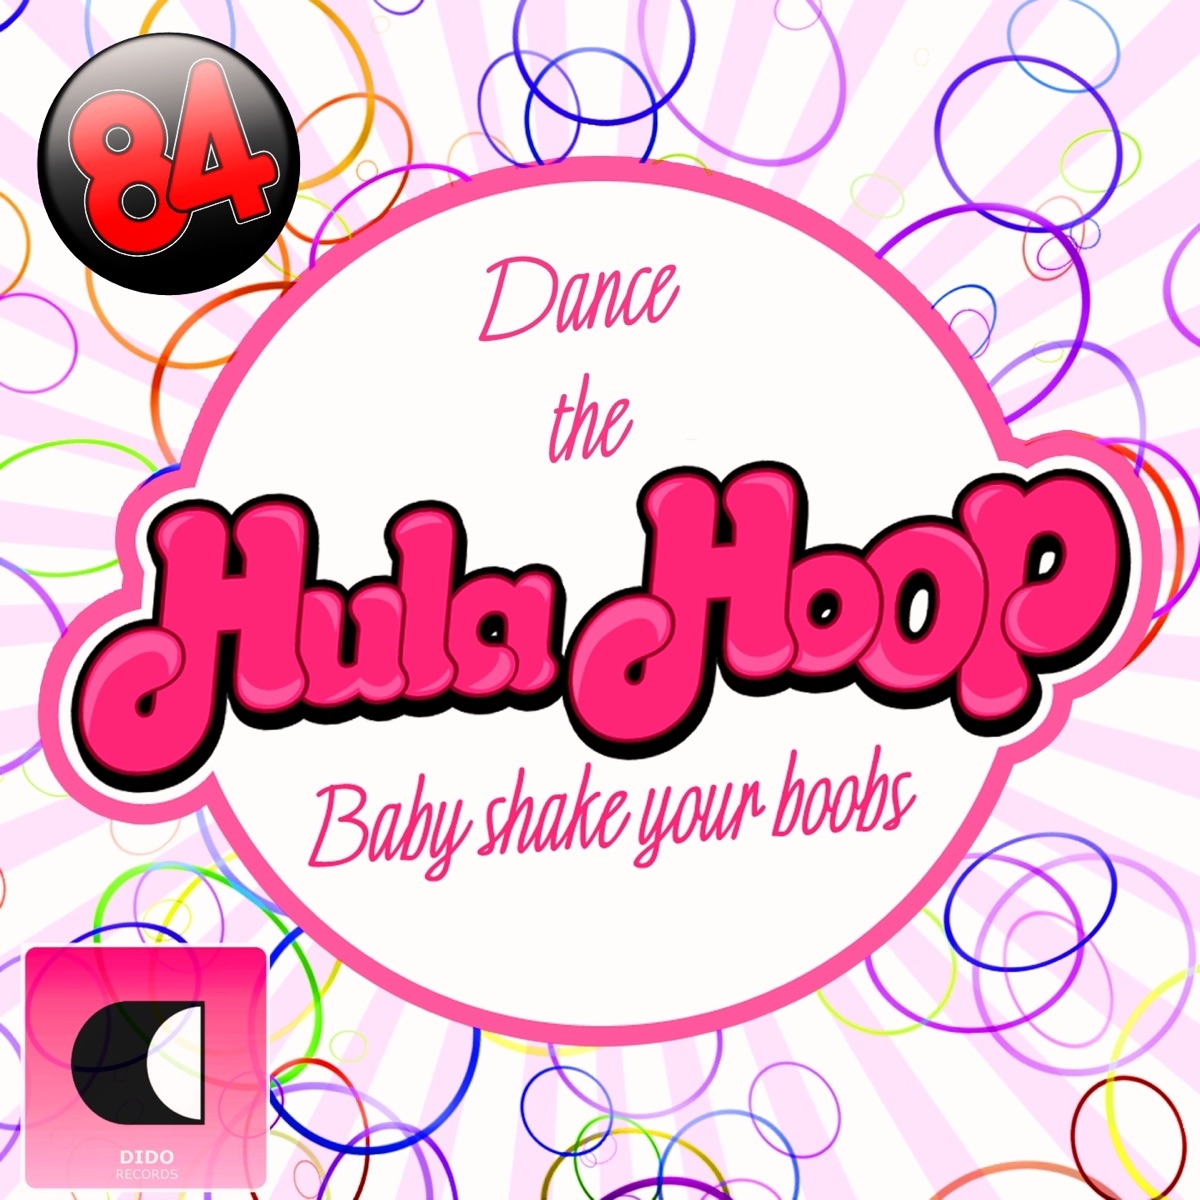 Dance the Hula Hoop (Baby Shake Your Boobs) - EP - Album by 84